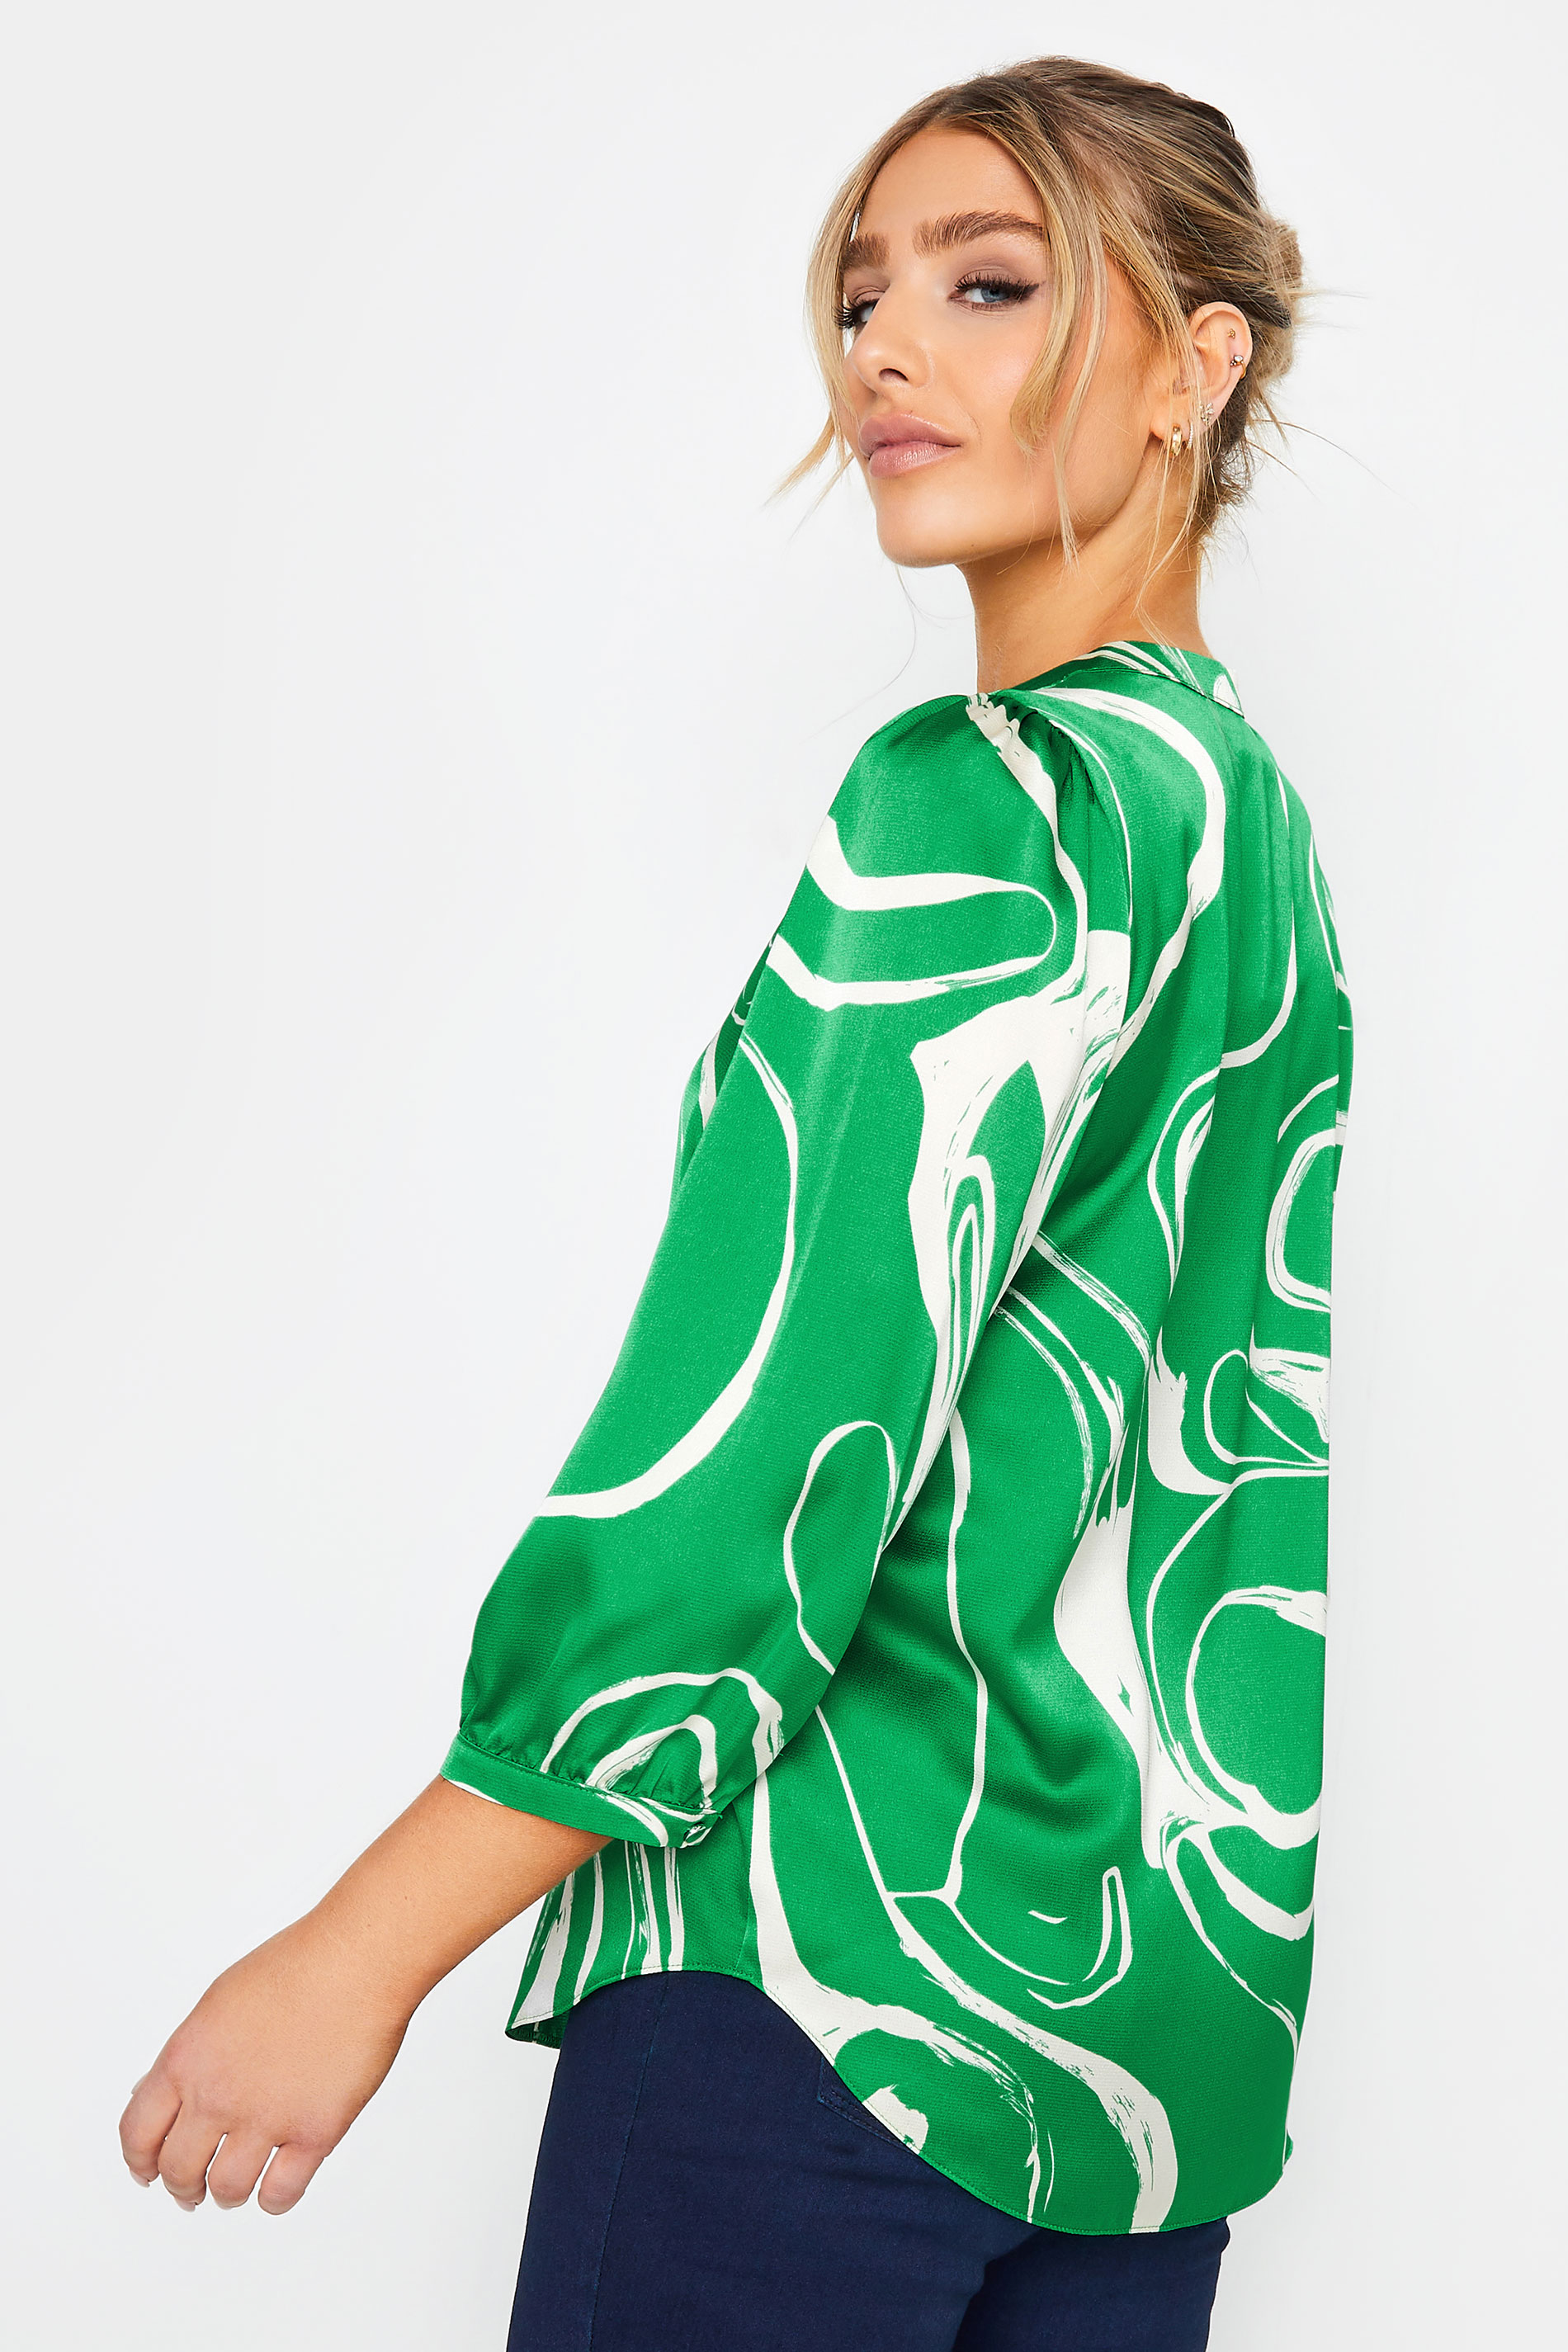 M&Co Green Abstract Print 3/4 Sleeve Blouse | M&Co 3